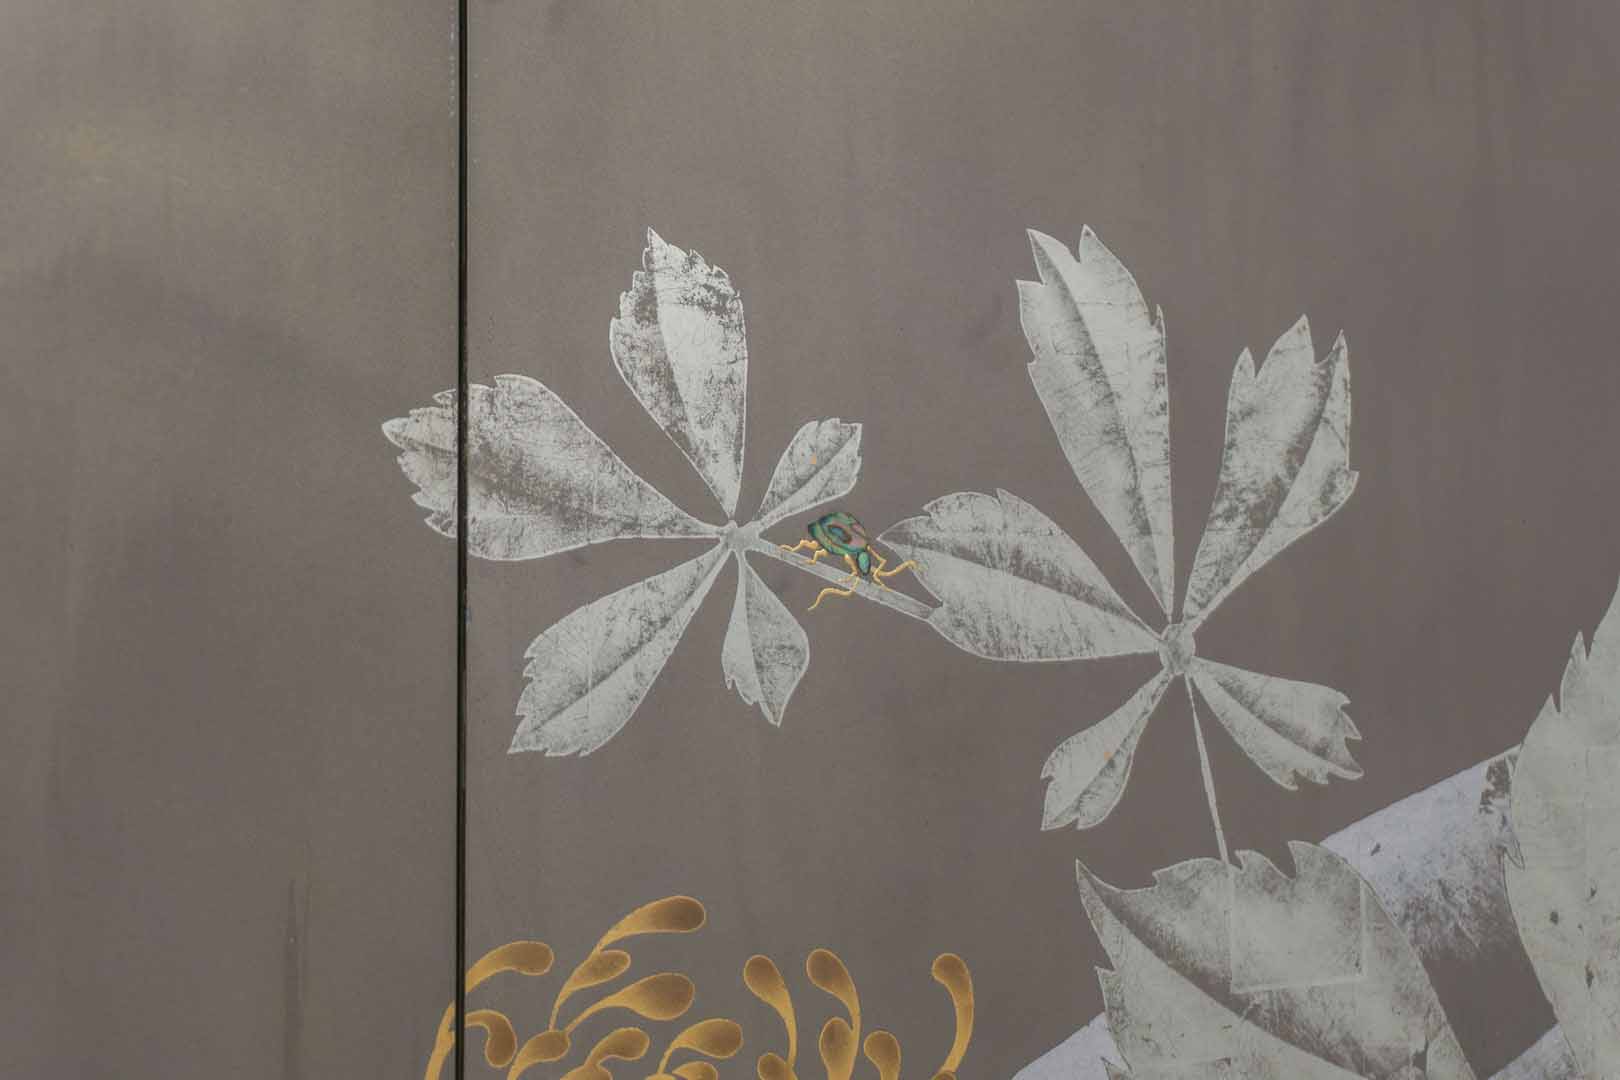 Gold leaf decorative artwork with mother of pearl details